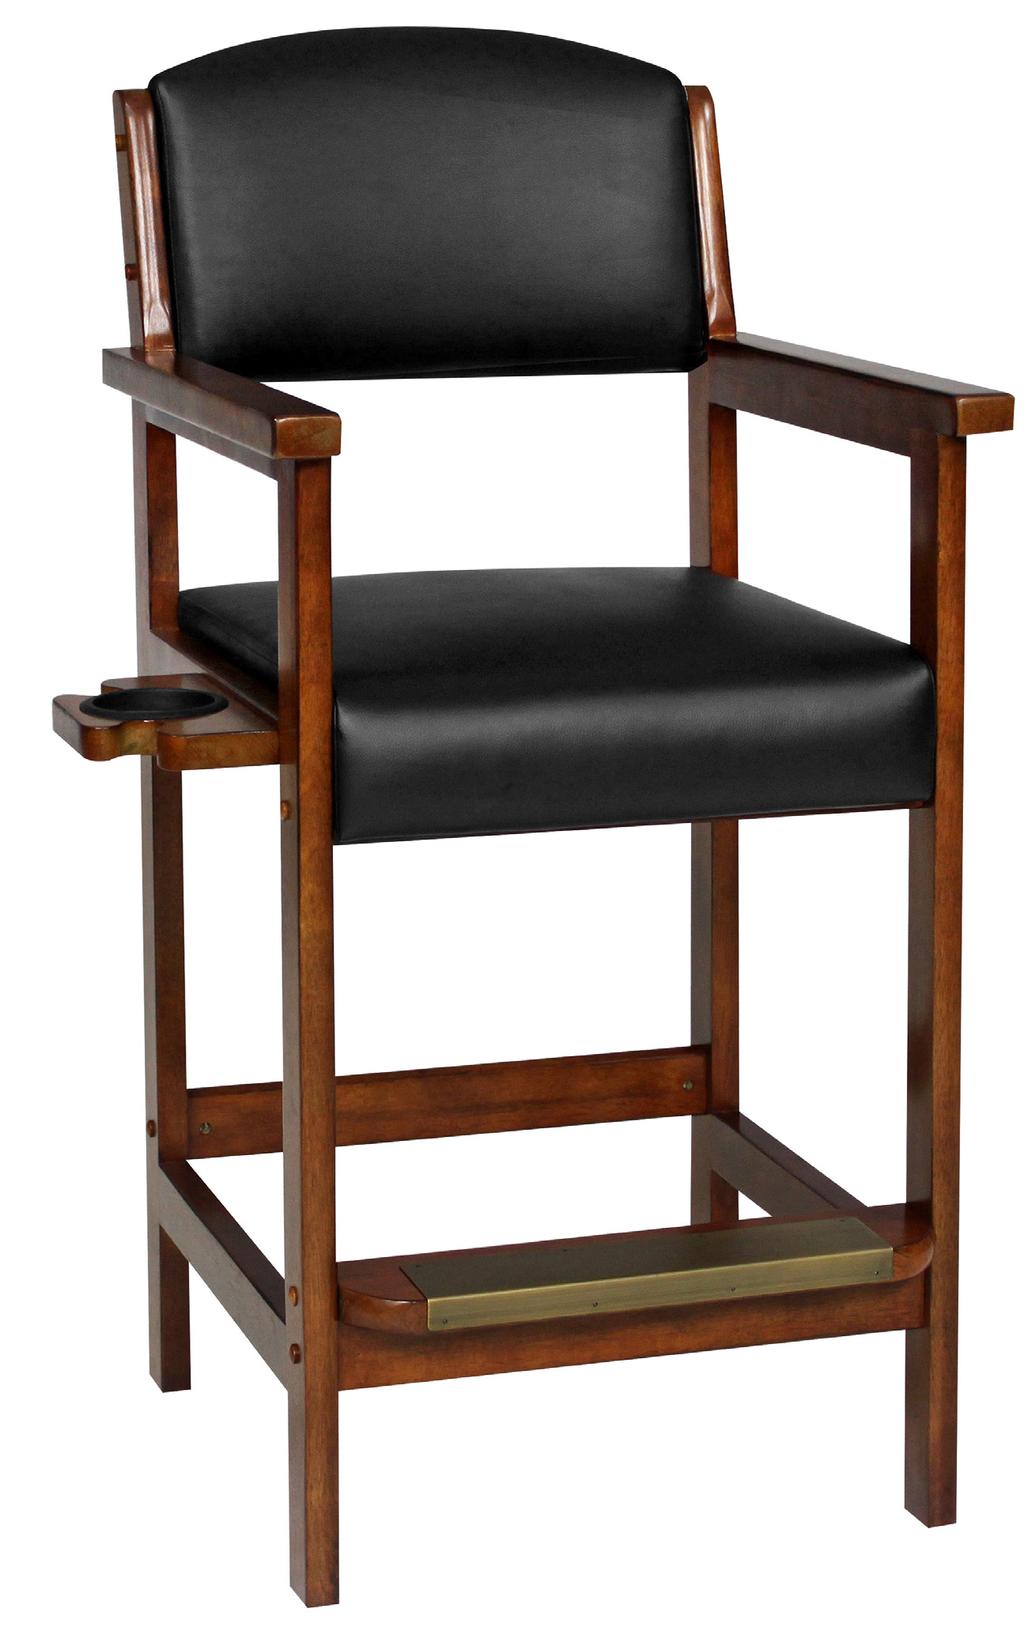 SPECTATOR CHAIR Keep an eye on the game at just the right height or provide additional